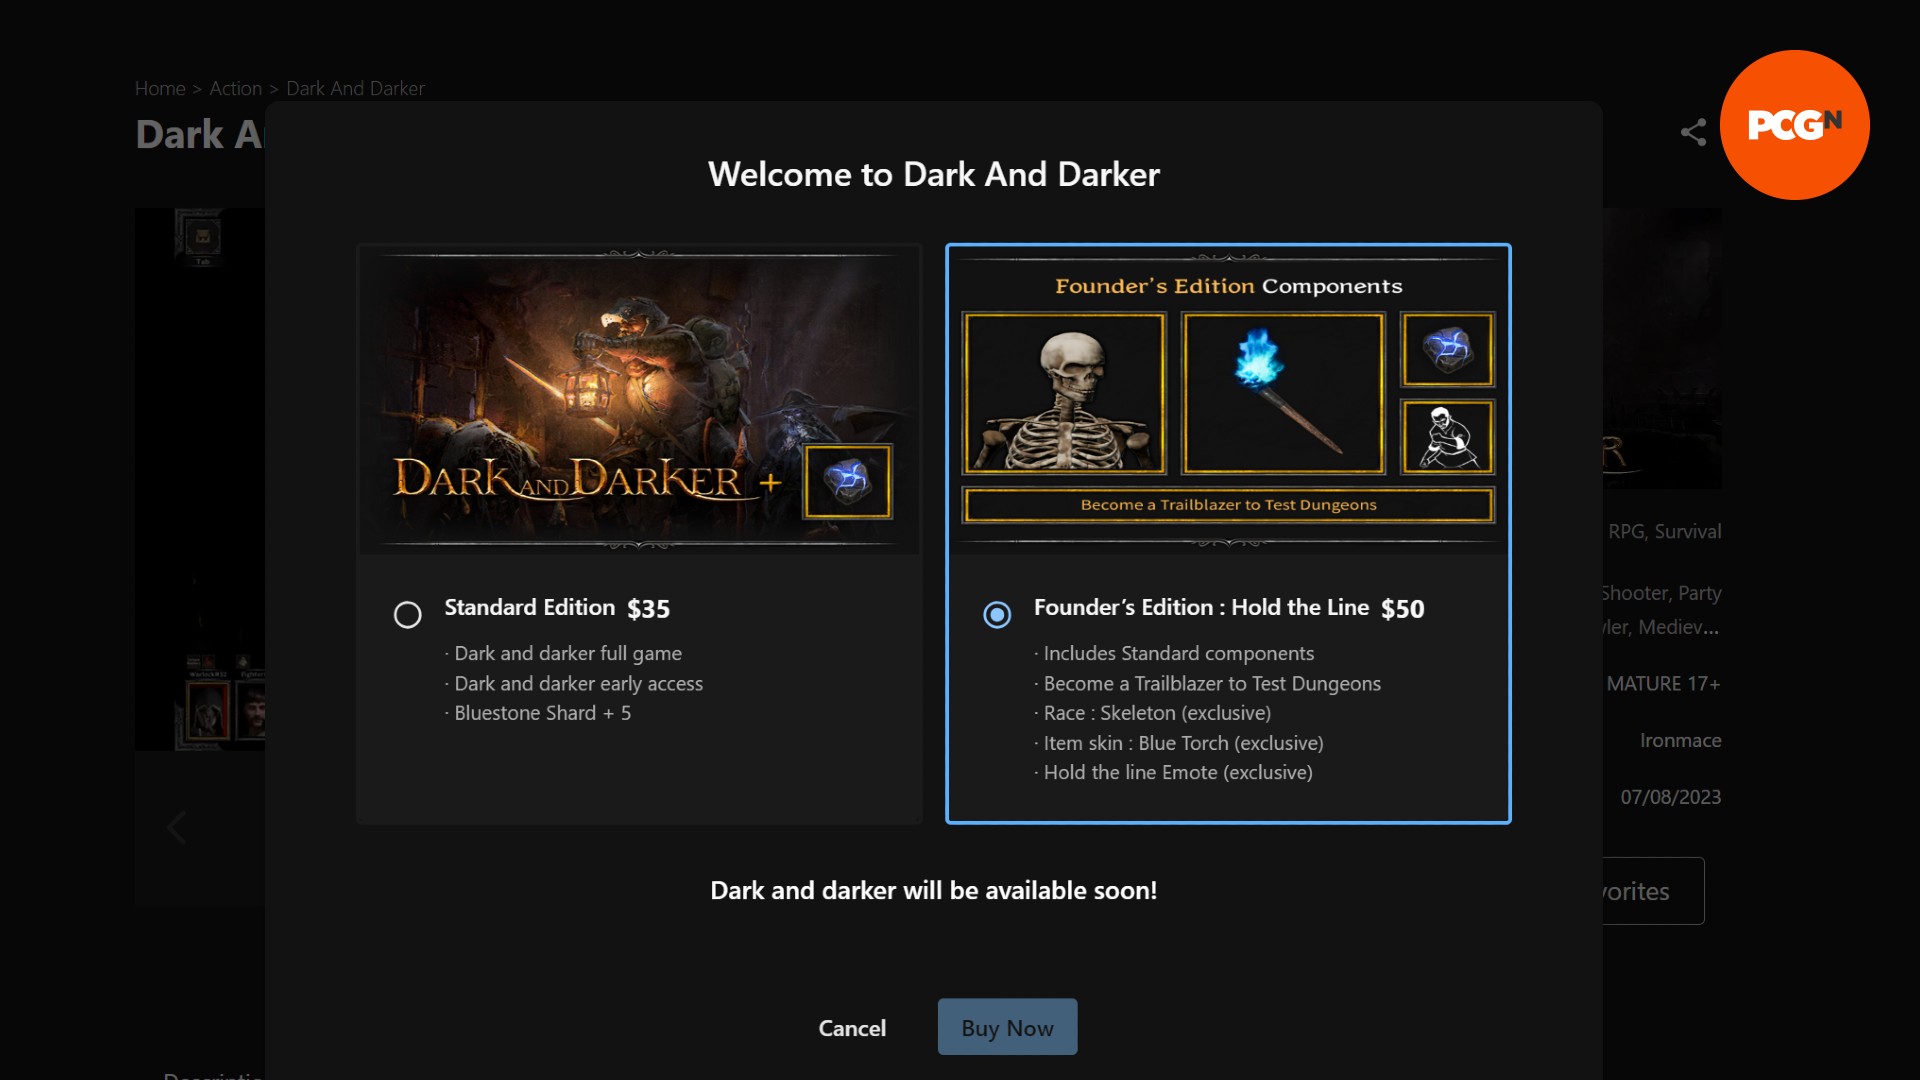 How to Play Dark & Darker: Where to Buy & Download